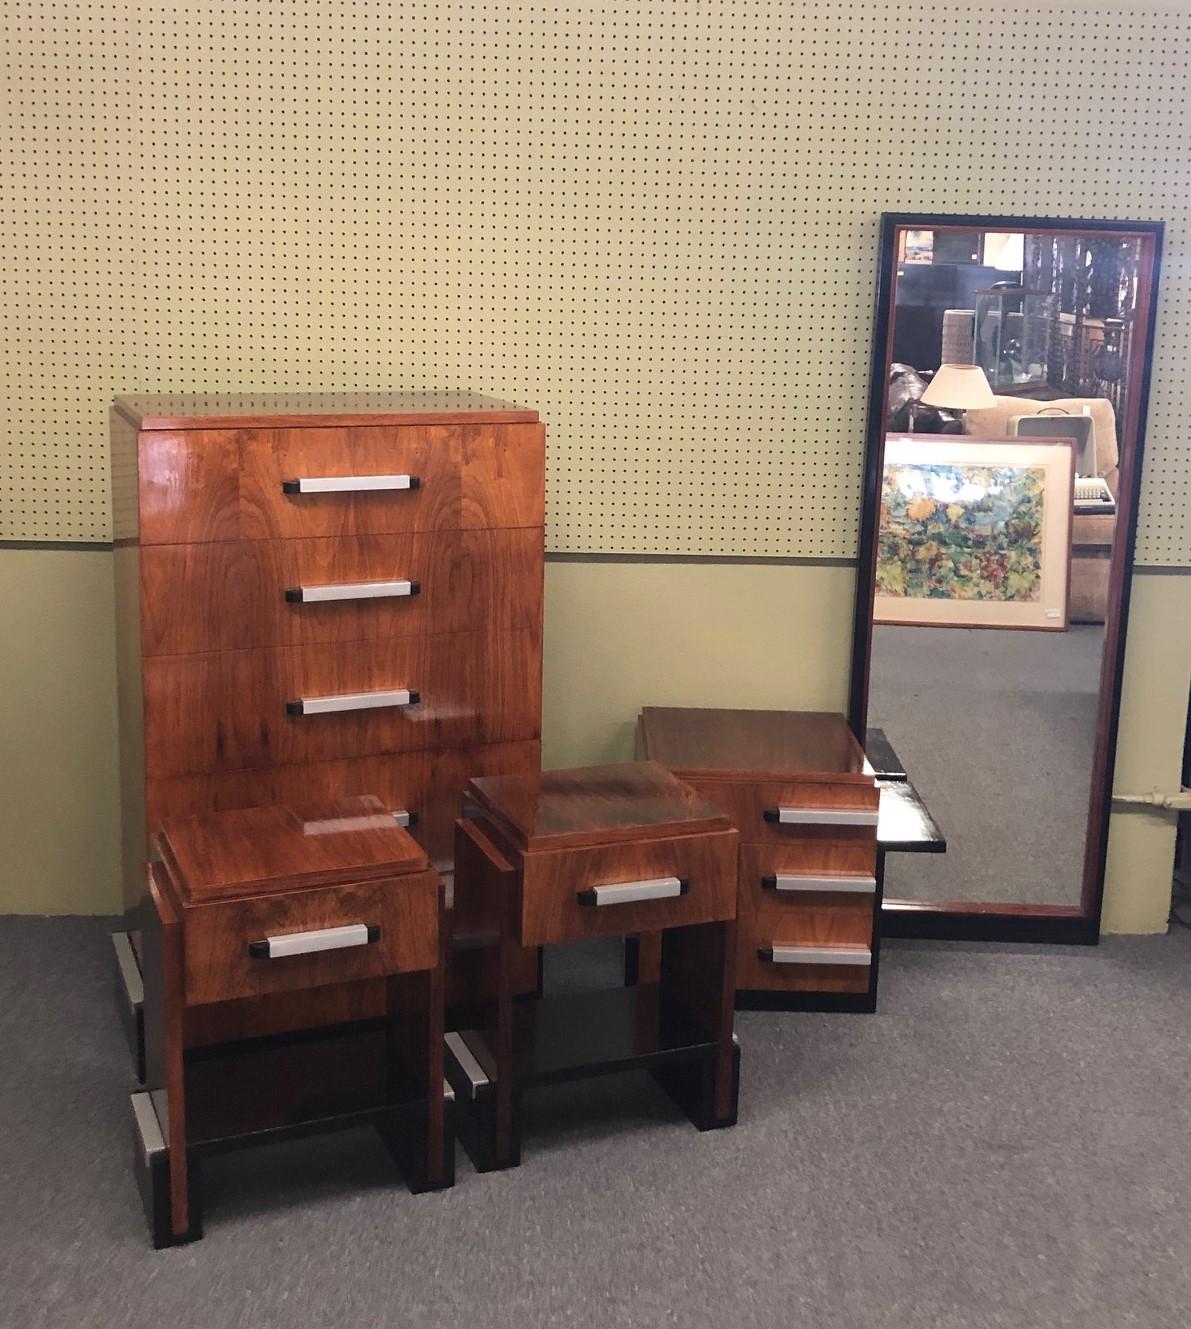 Spectacular five-piece Art Deco bedroom set in rosewood by Donald Deskey for John Widdicomb, circa 1930s. The set has been professionally refinished and restored and is in very good vintage condition. Included is a five-drawer dresser, a